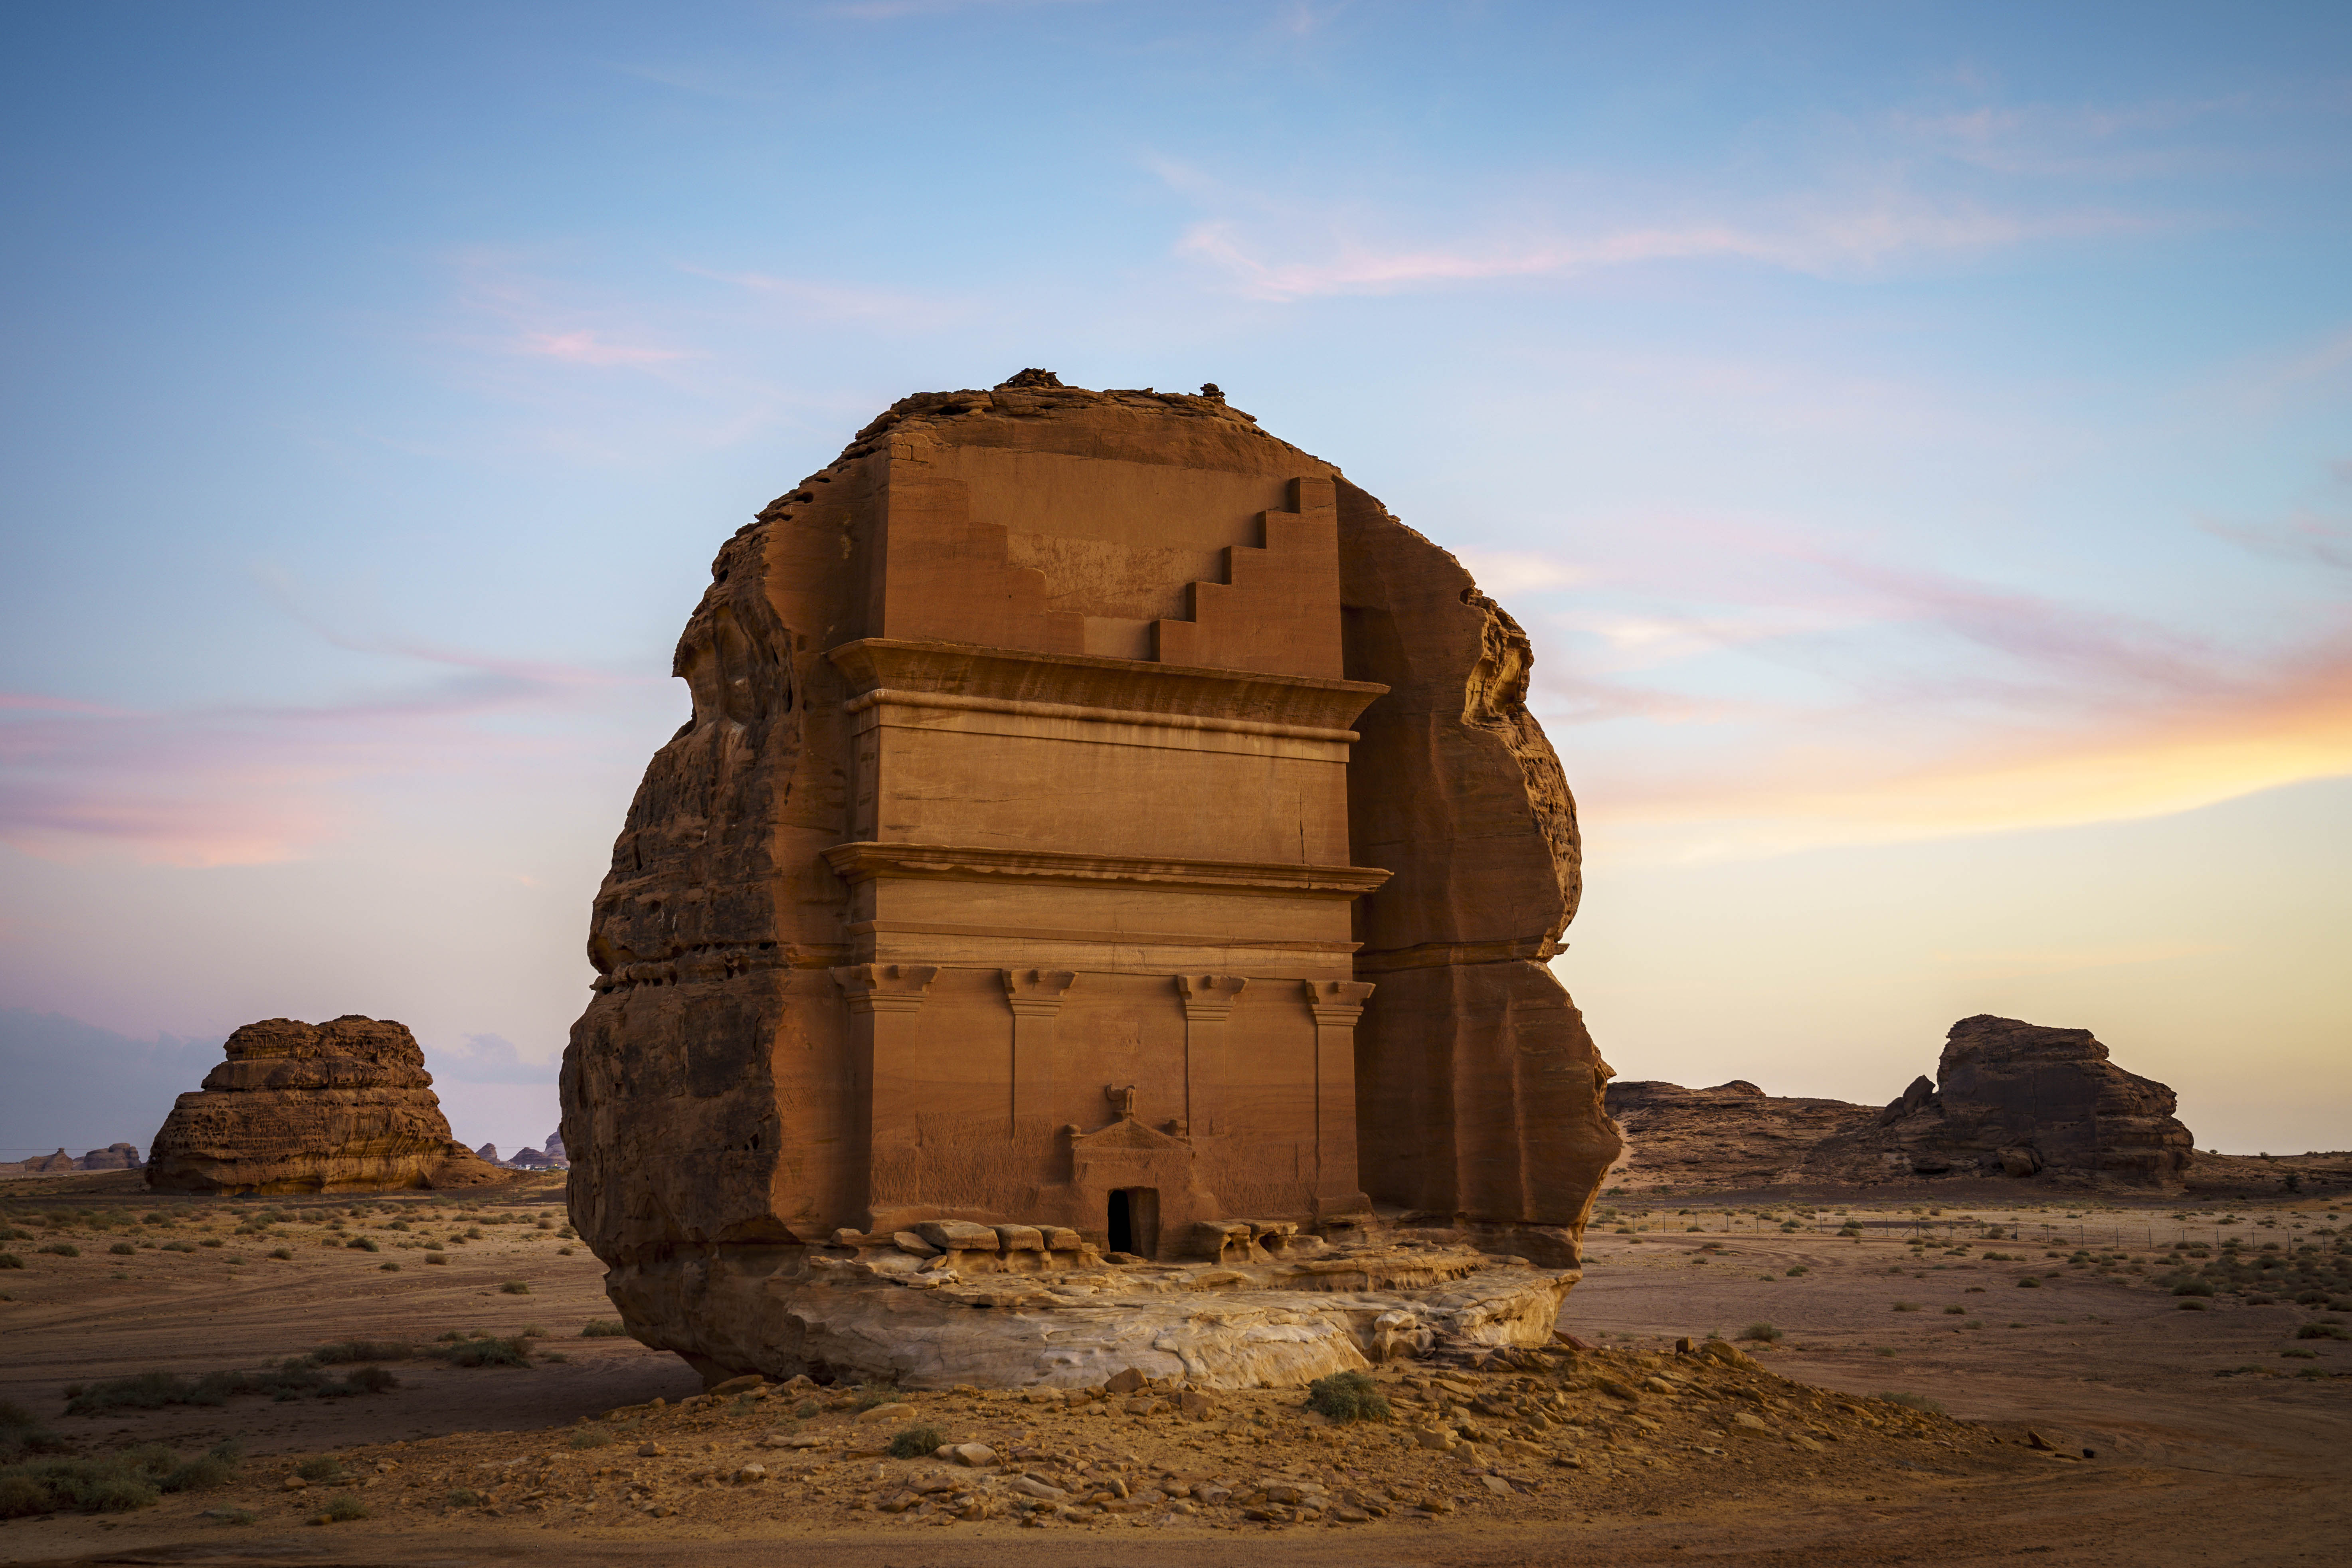 A stone building in the desert with Mada'in Saleh in the background Description automatically generated